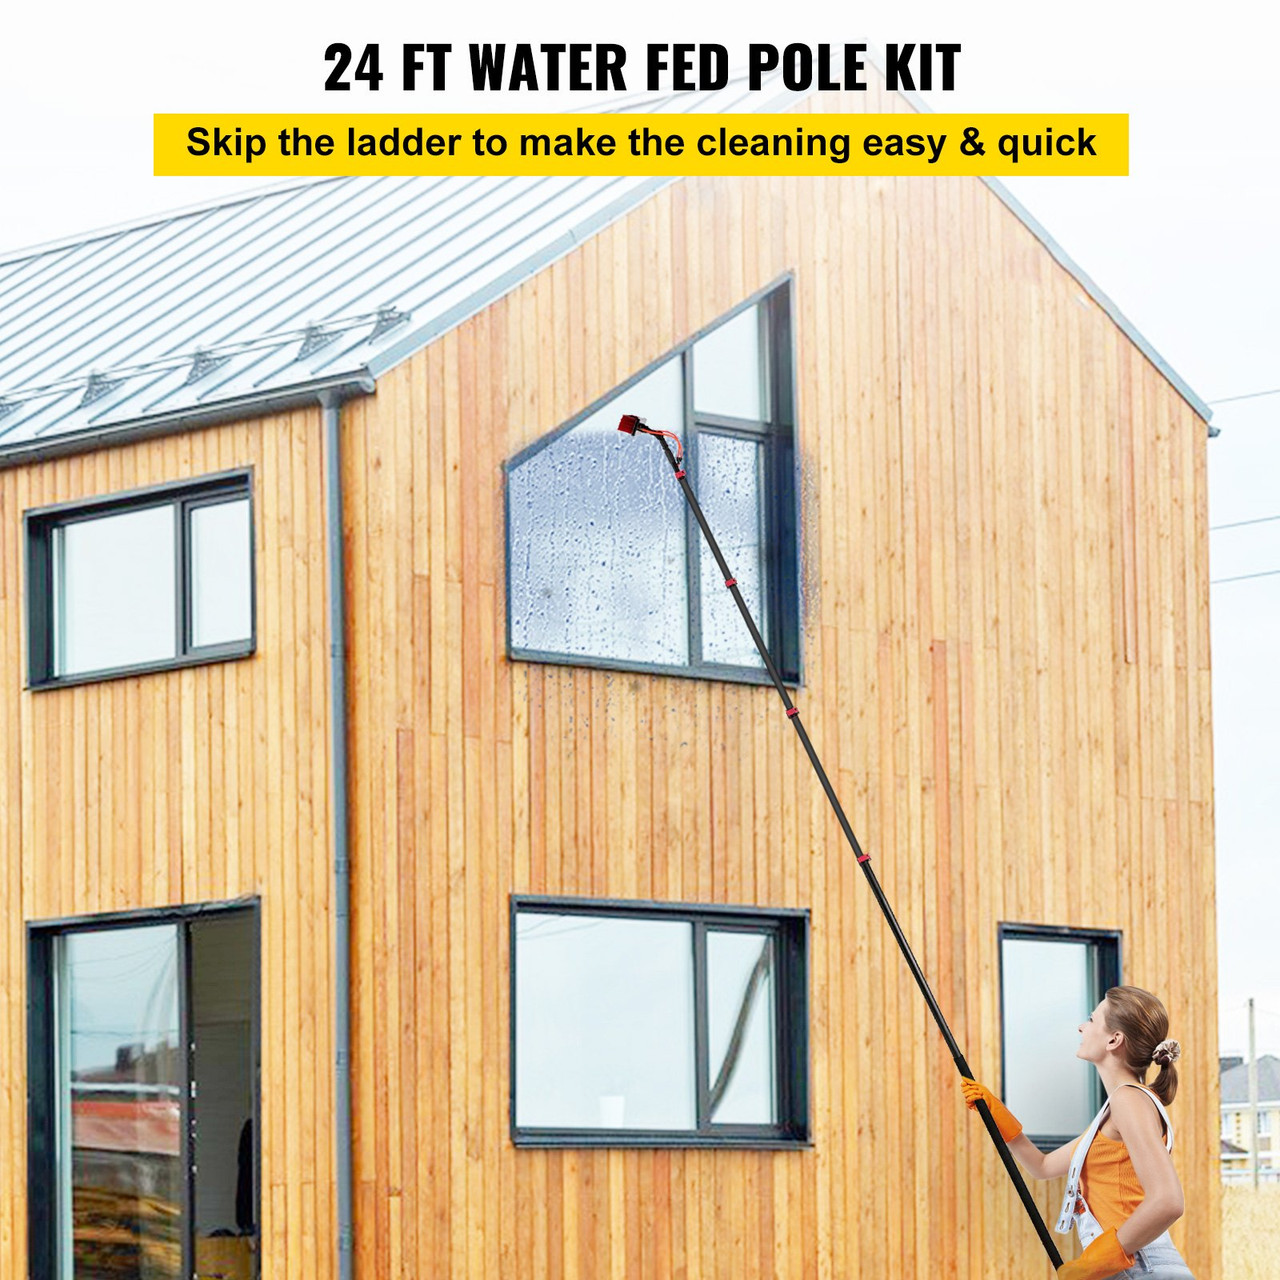 Water Fed Pole Kit, 24ft Length Water Fed Brush, 7.3m Water Fed Cleaning System, Aluminum Outdoor Window Cleaner w/ 18ft Hose, Cleaning And Washing Tool For Window Glass, Solar Panel